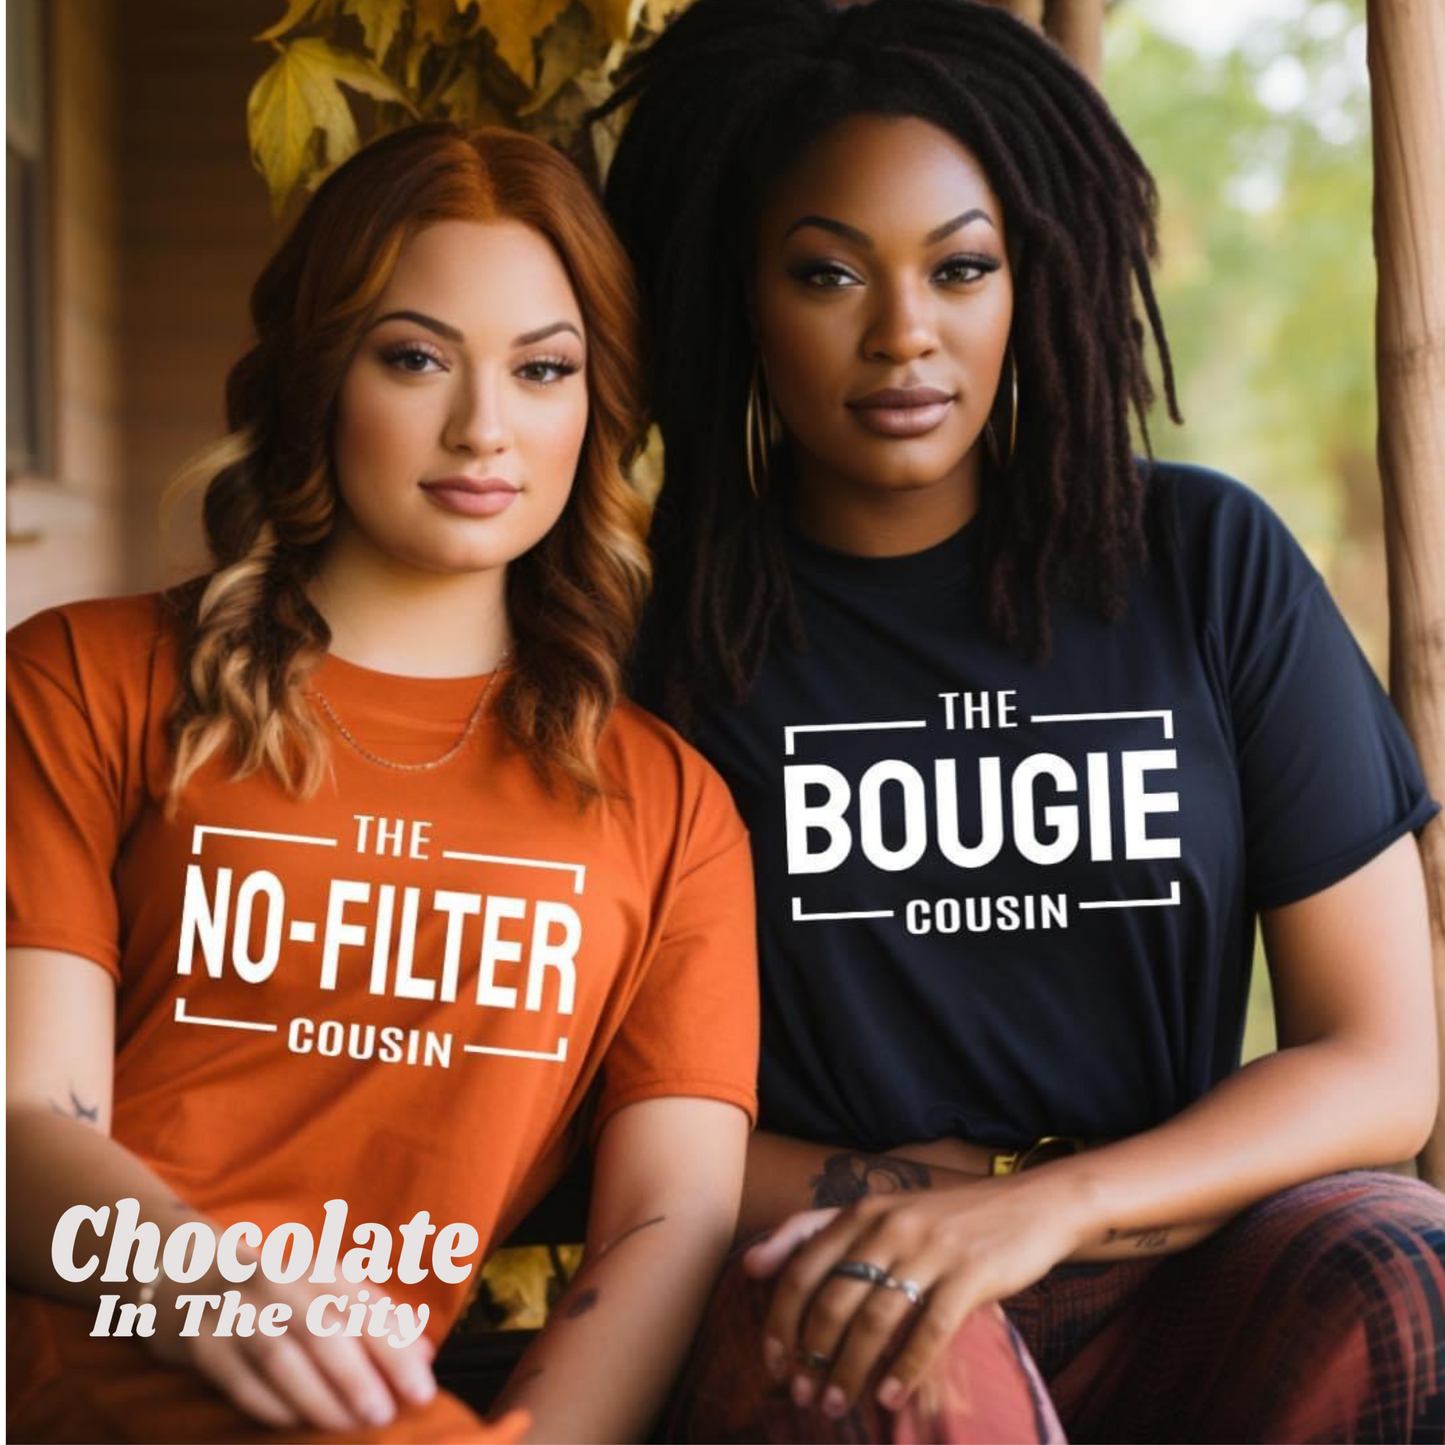 The Bougie Cousin T-Shirt